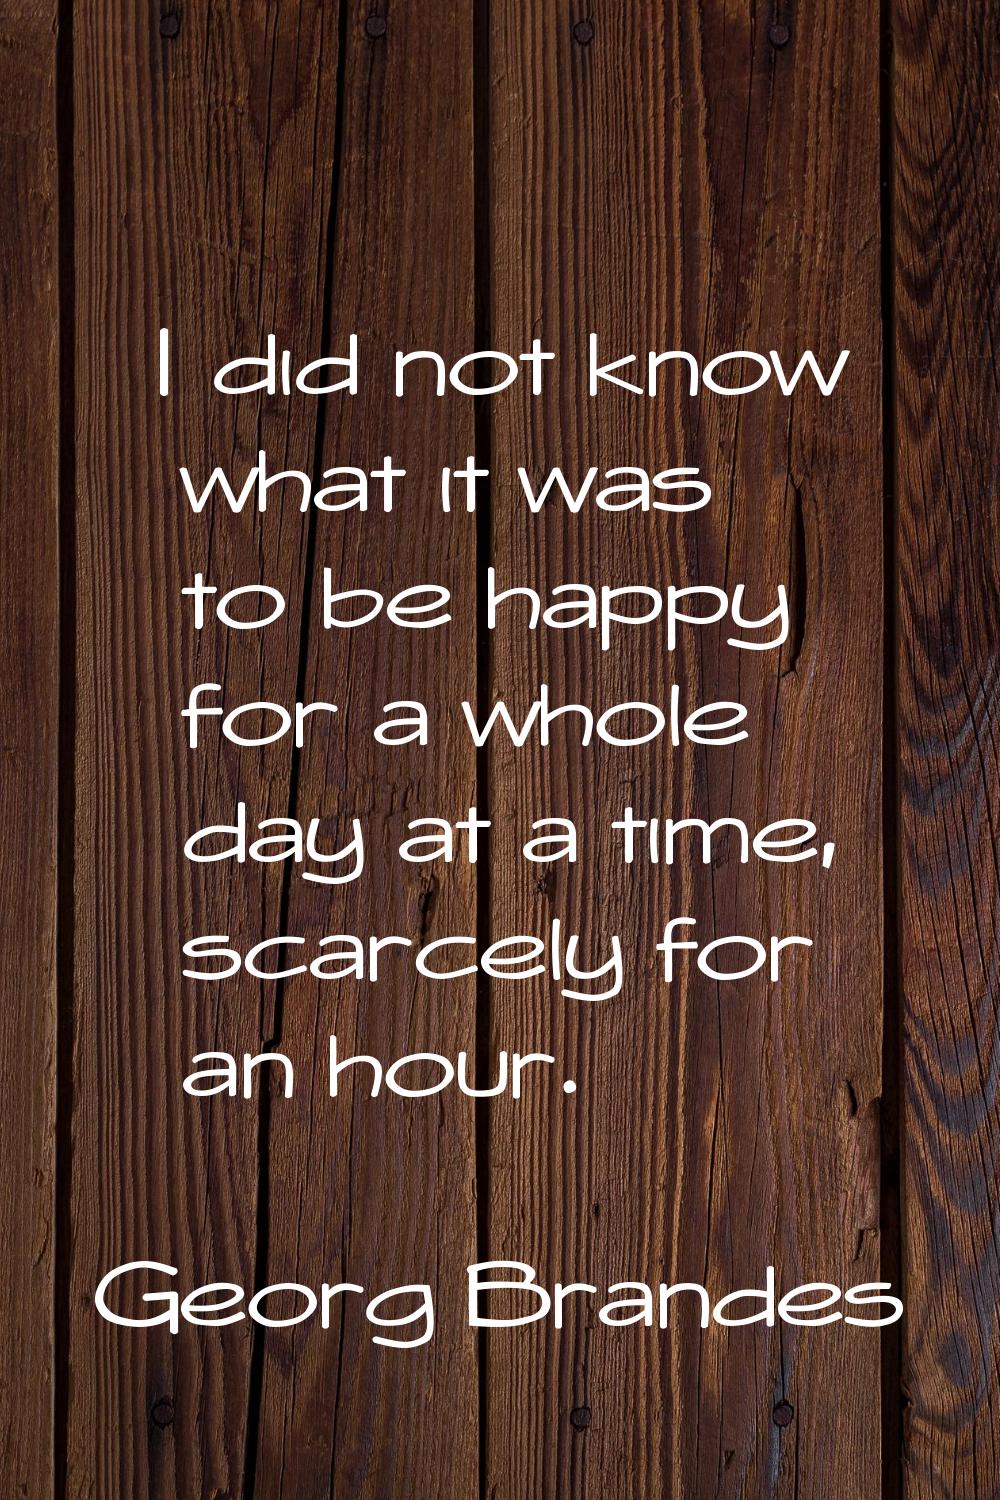 I did not know what it was to be happy for a whole day at a time, scarcely for an hour.